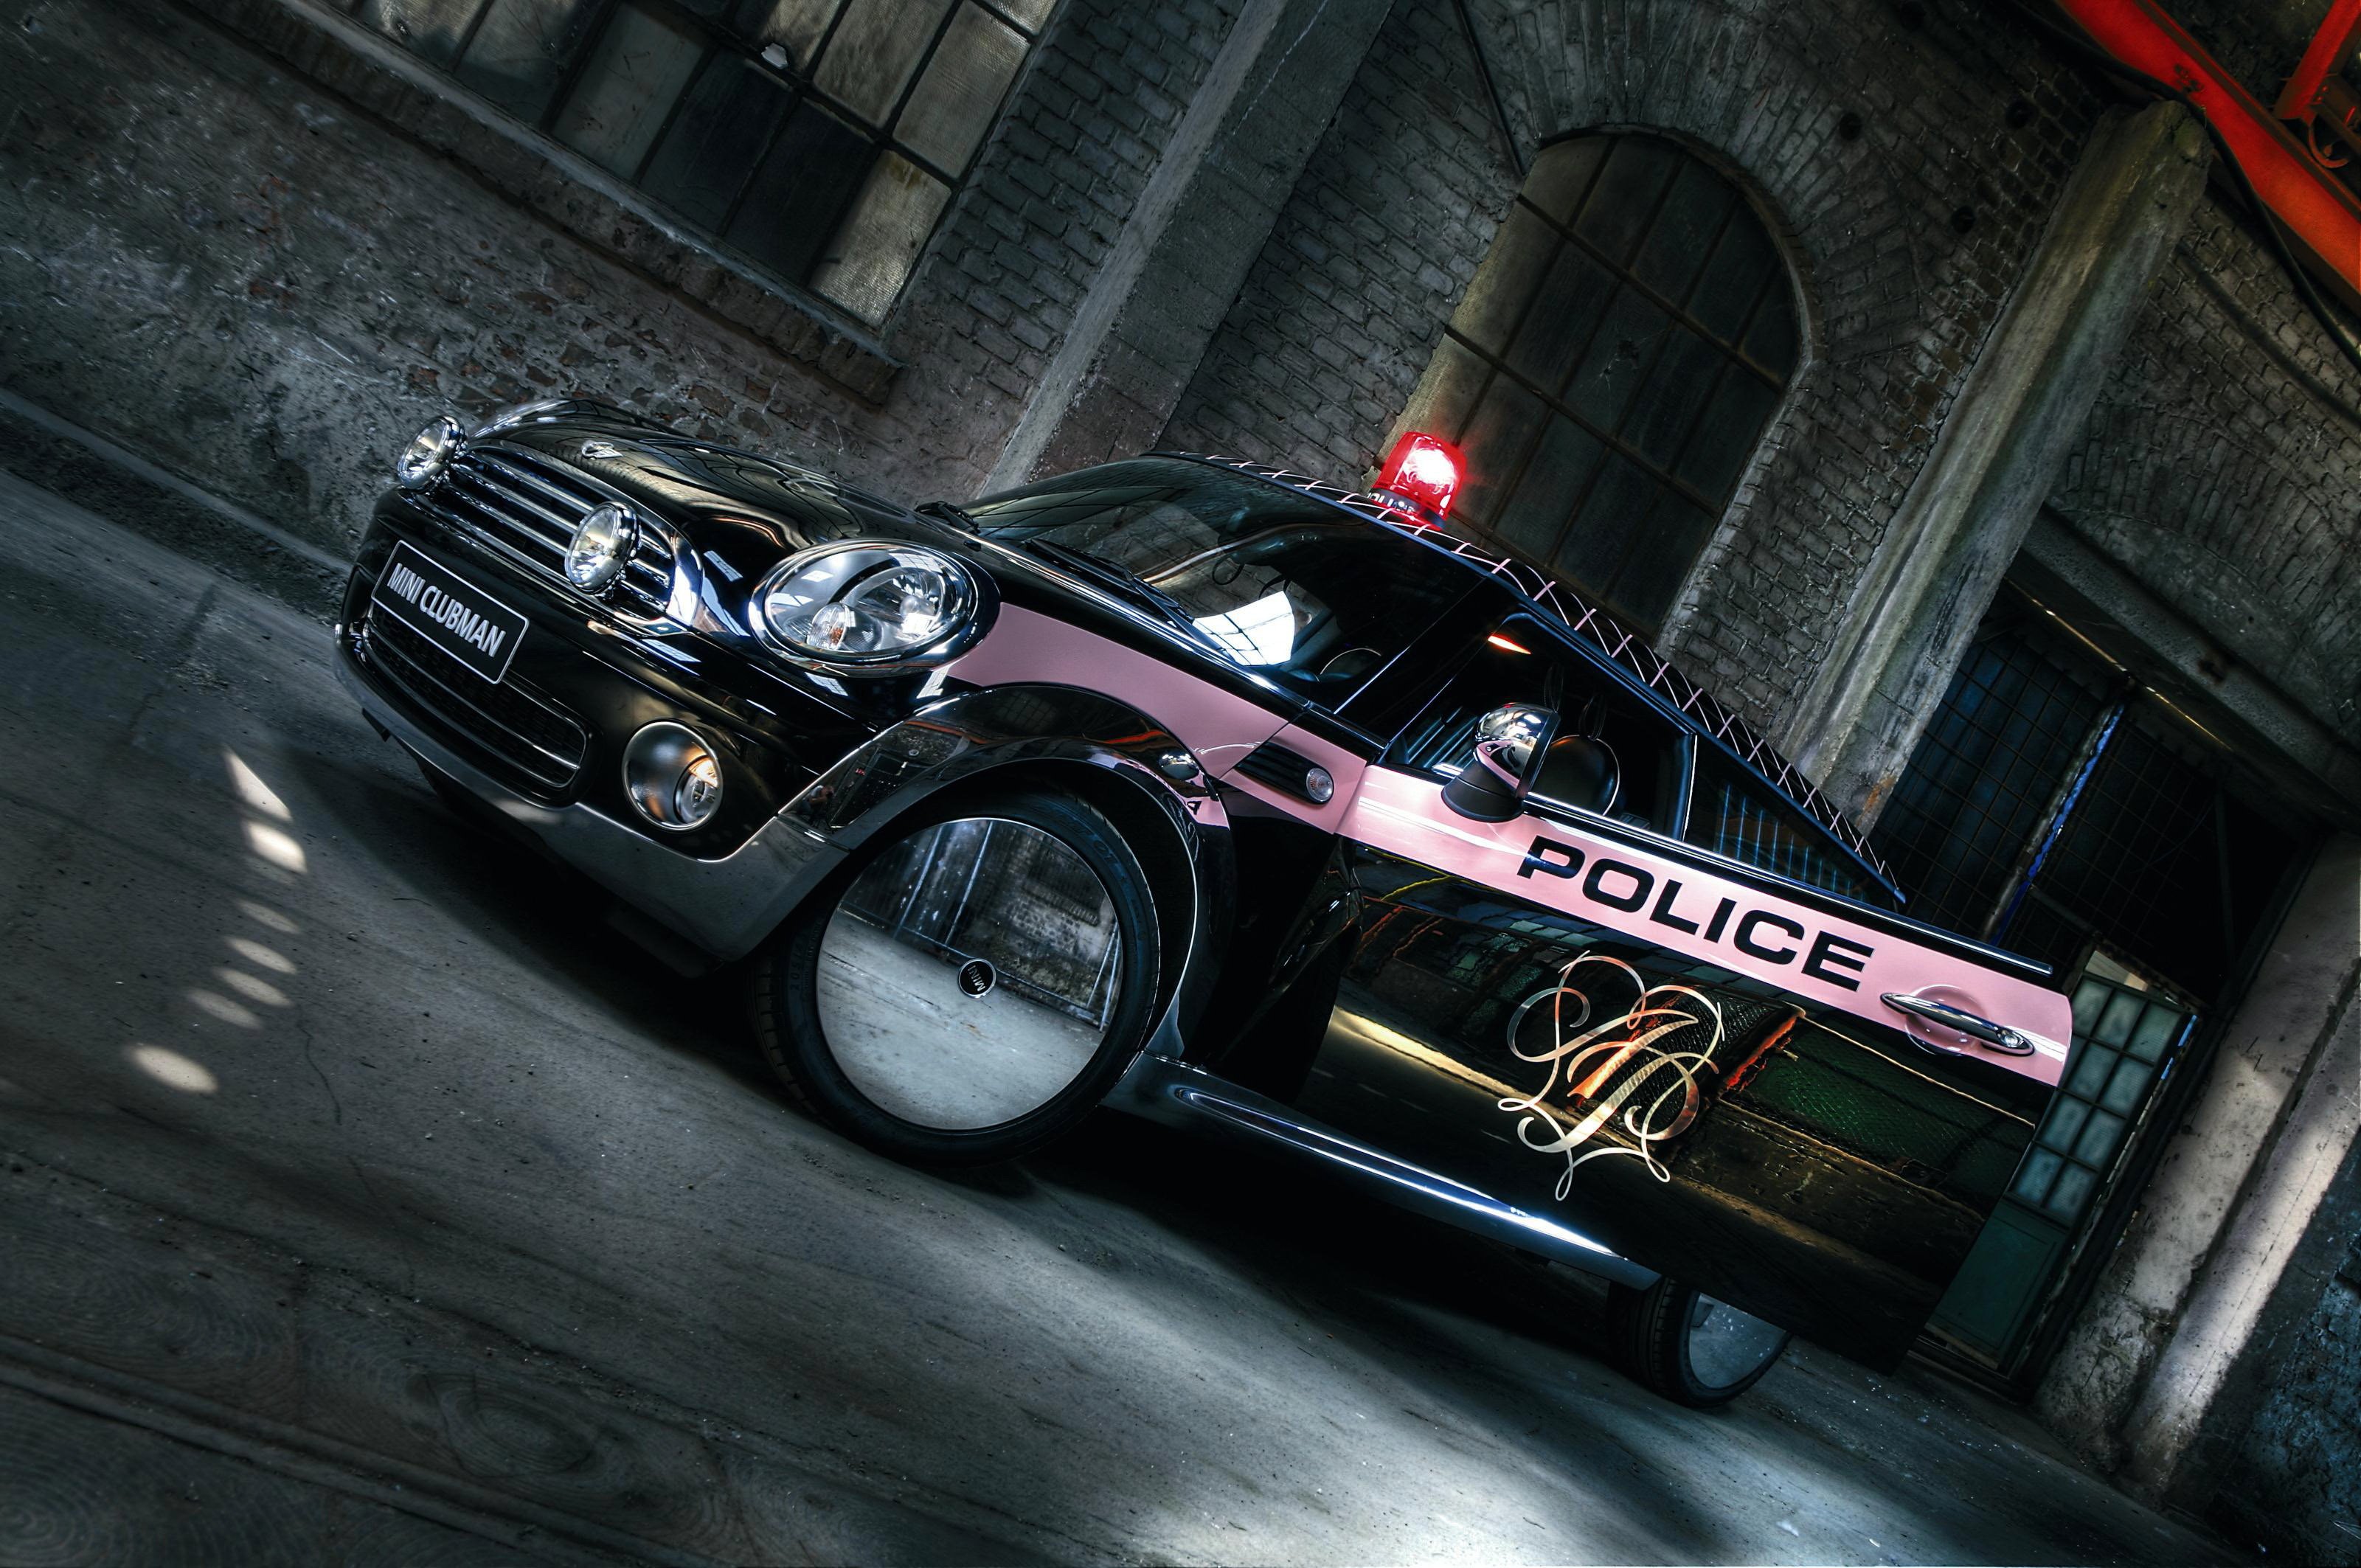 2008, Mini, Cooper, Clubman, Agent provocateur, R55, Police, Emergency Wallpaper